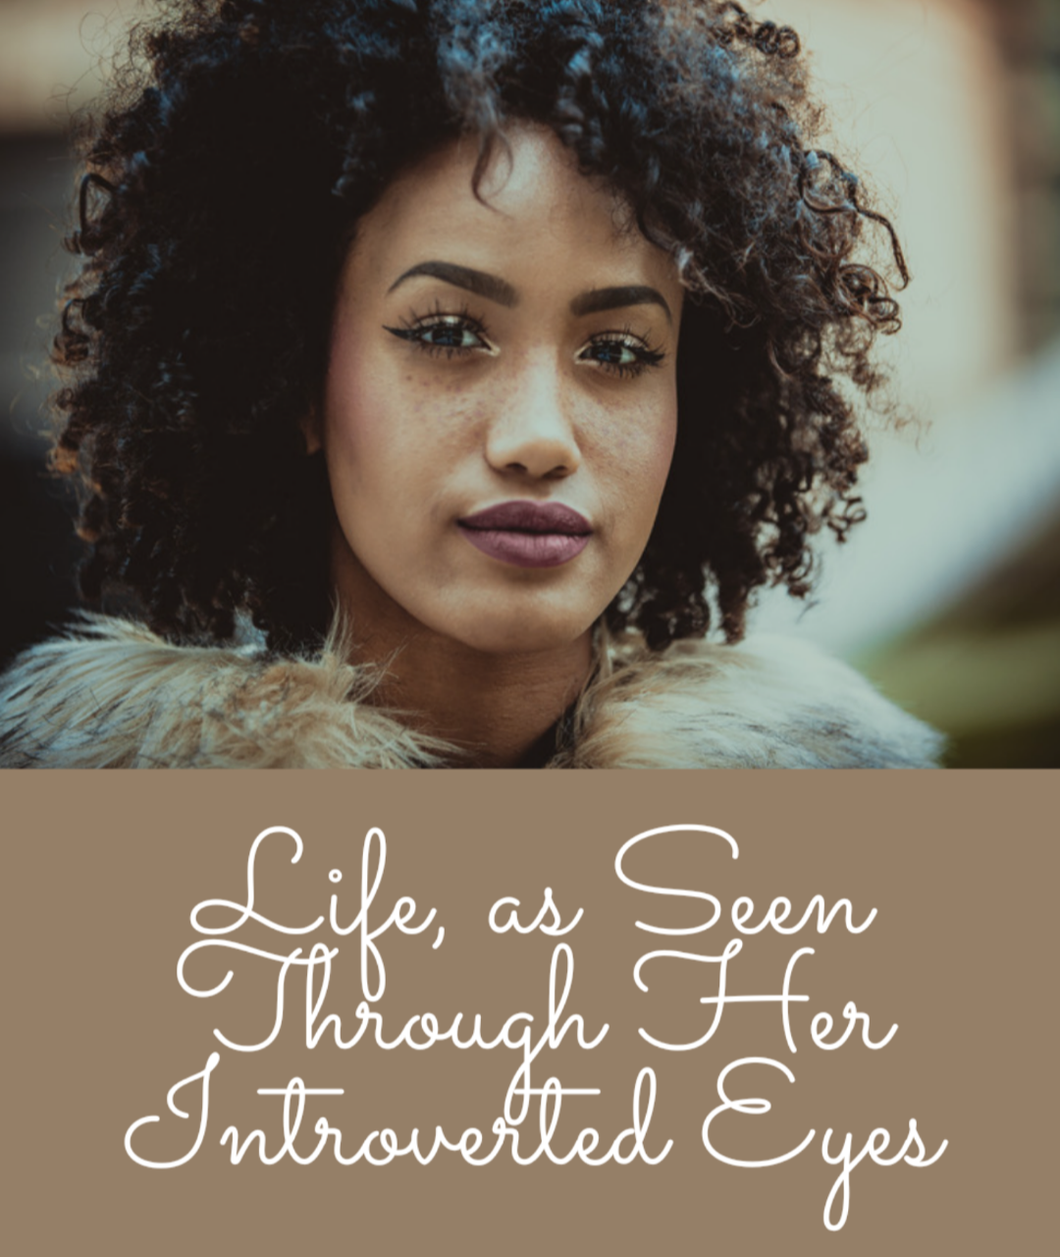 BOOKS: LIFE, AS SEEN THROUGH HER INTROVERTED EYES (Collection of poetry and prose)